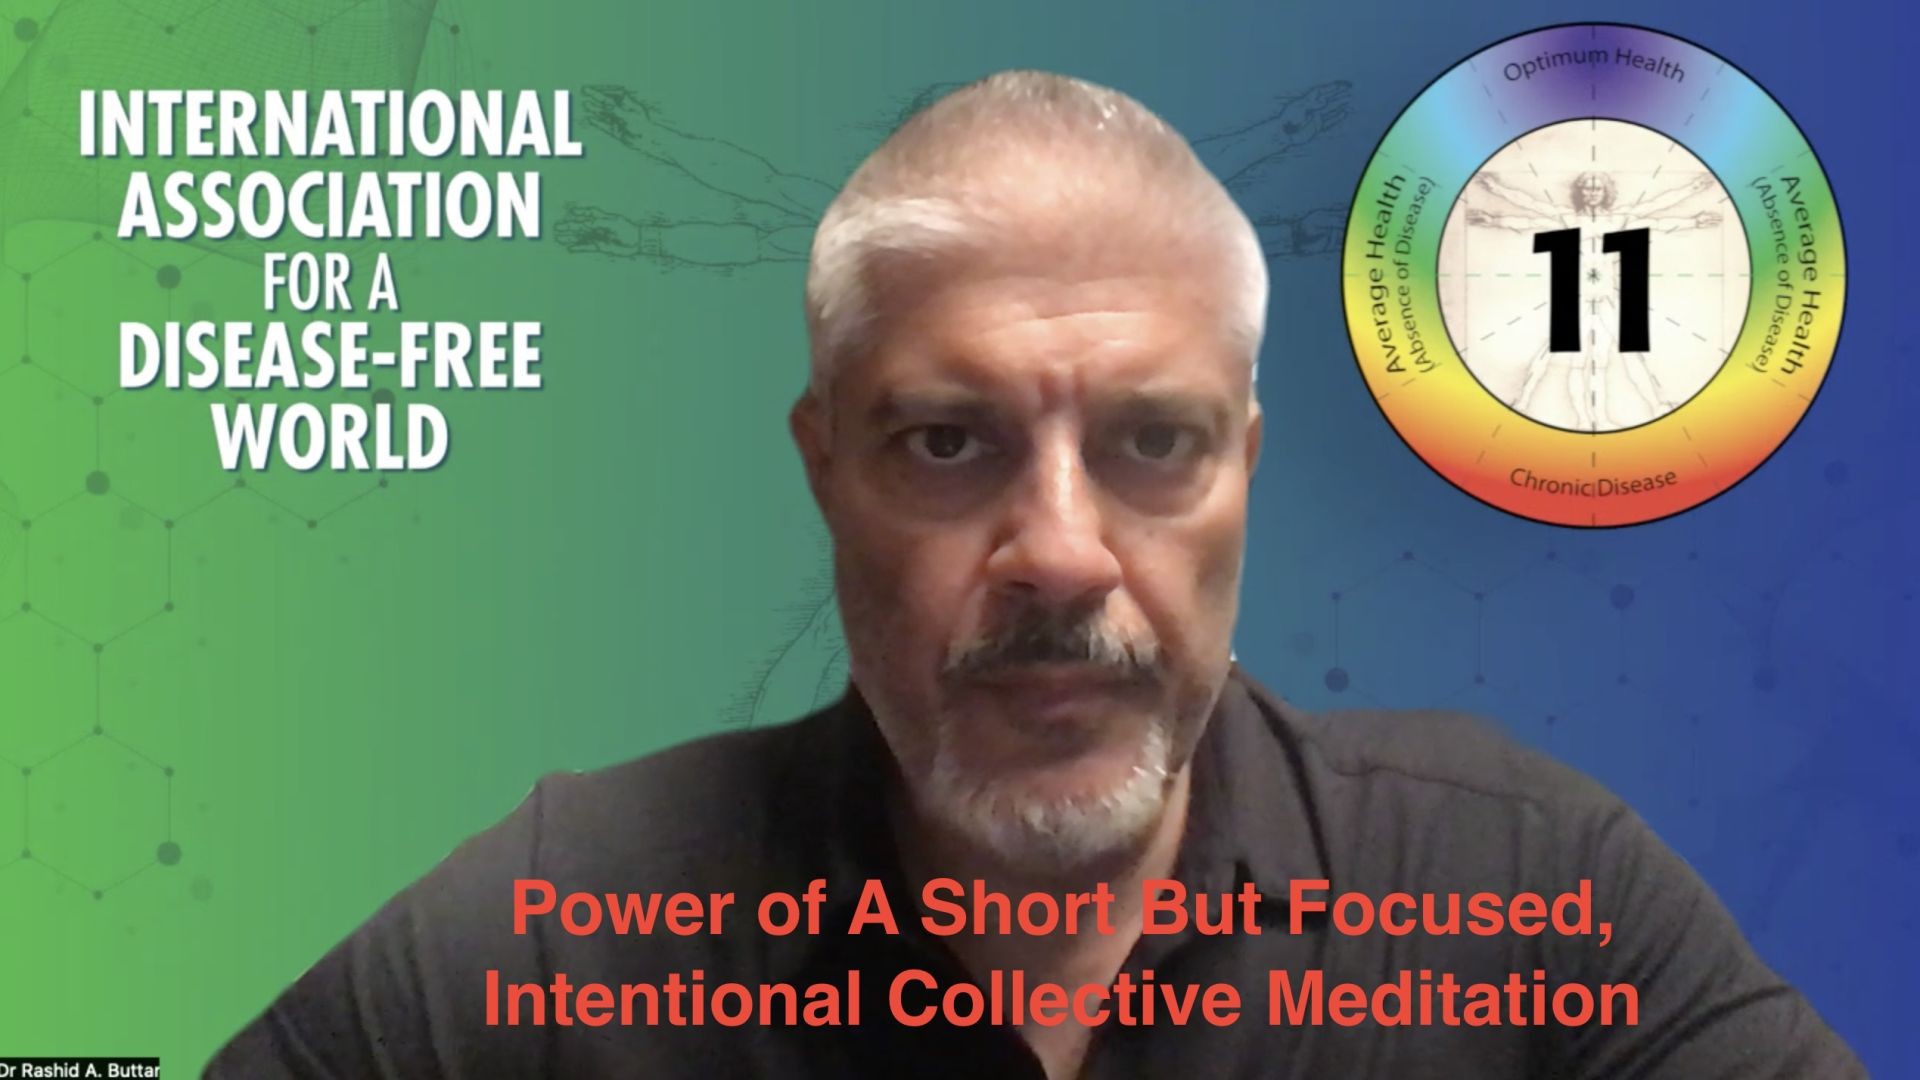 The Power of Collective, Focused, Intentional Meditation In Silence - Dr Rashid A Buttar